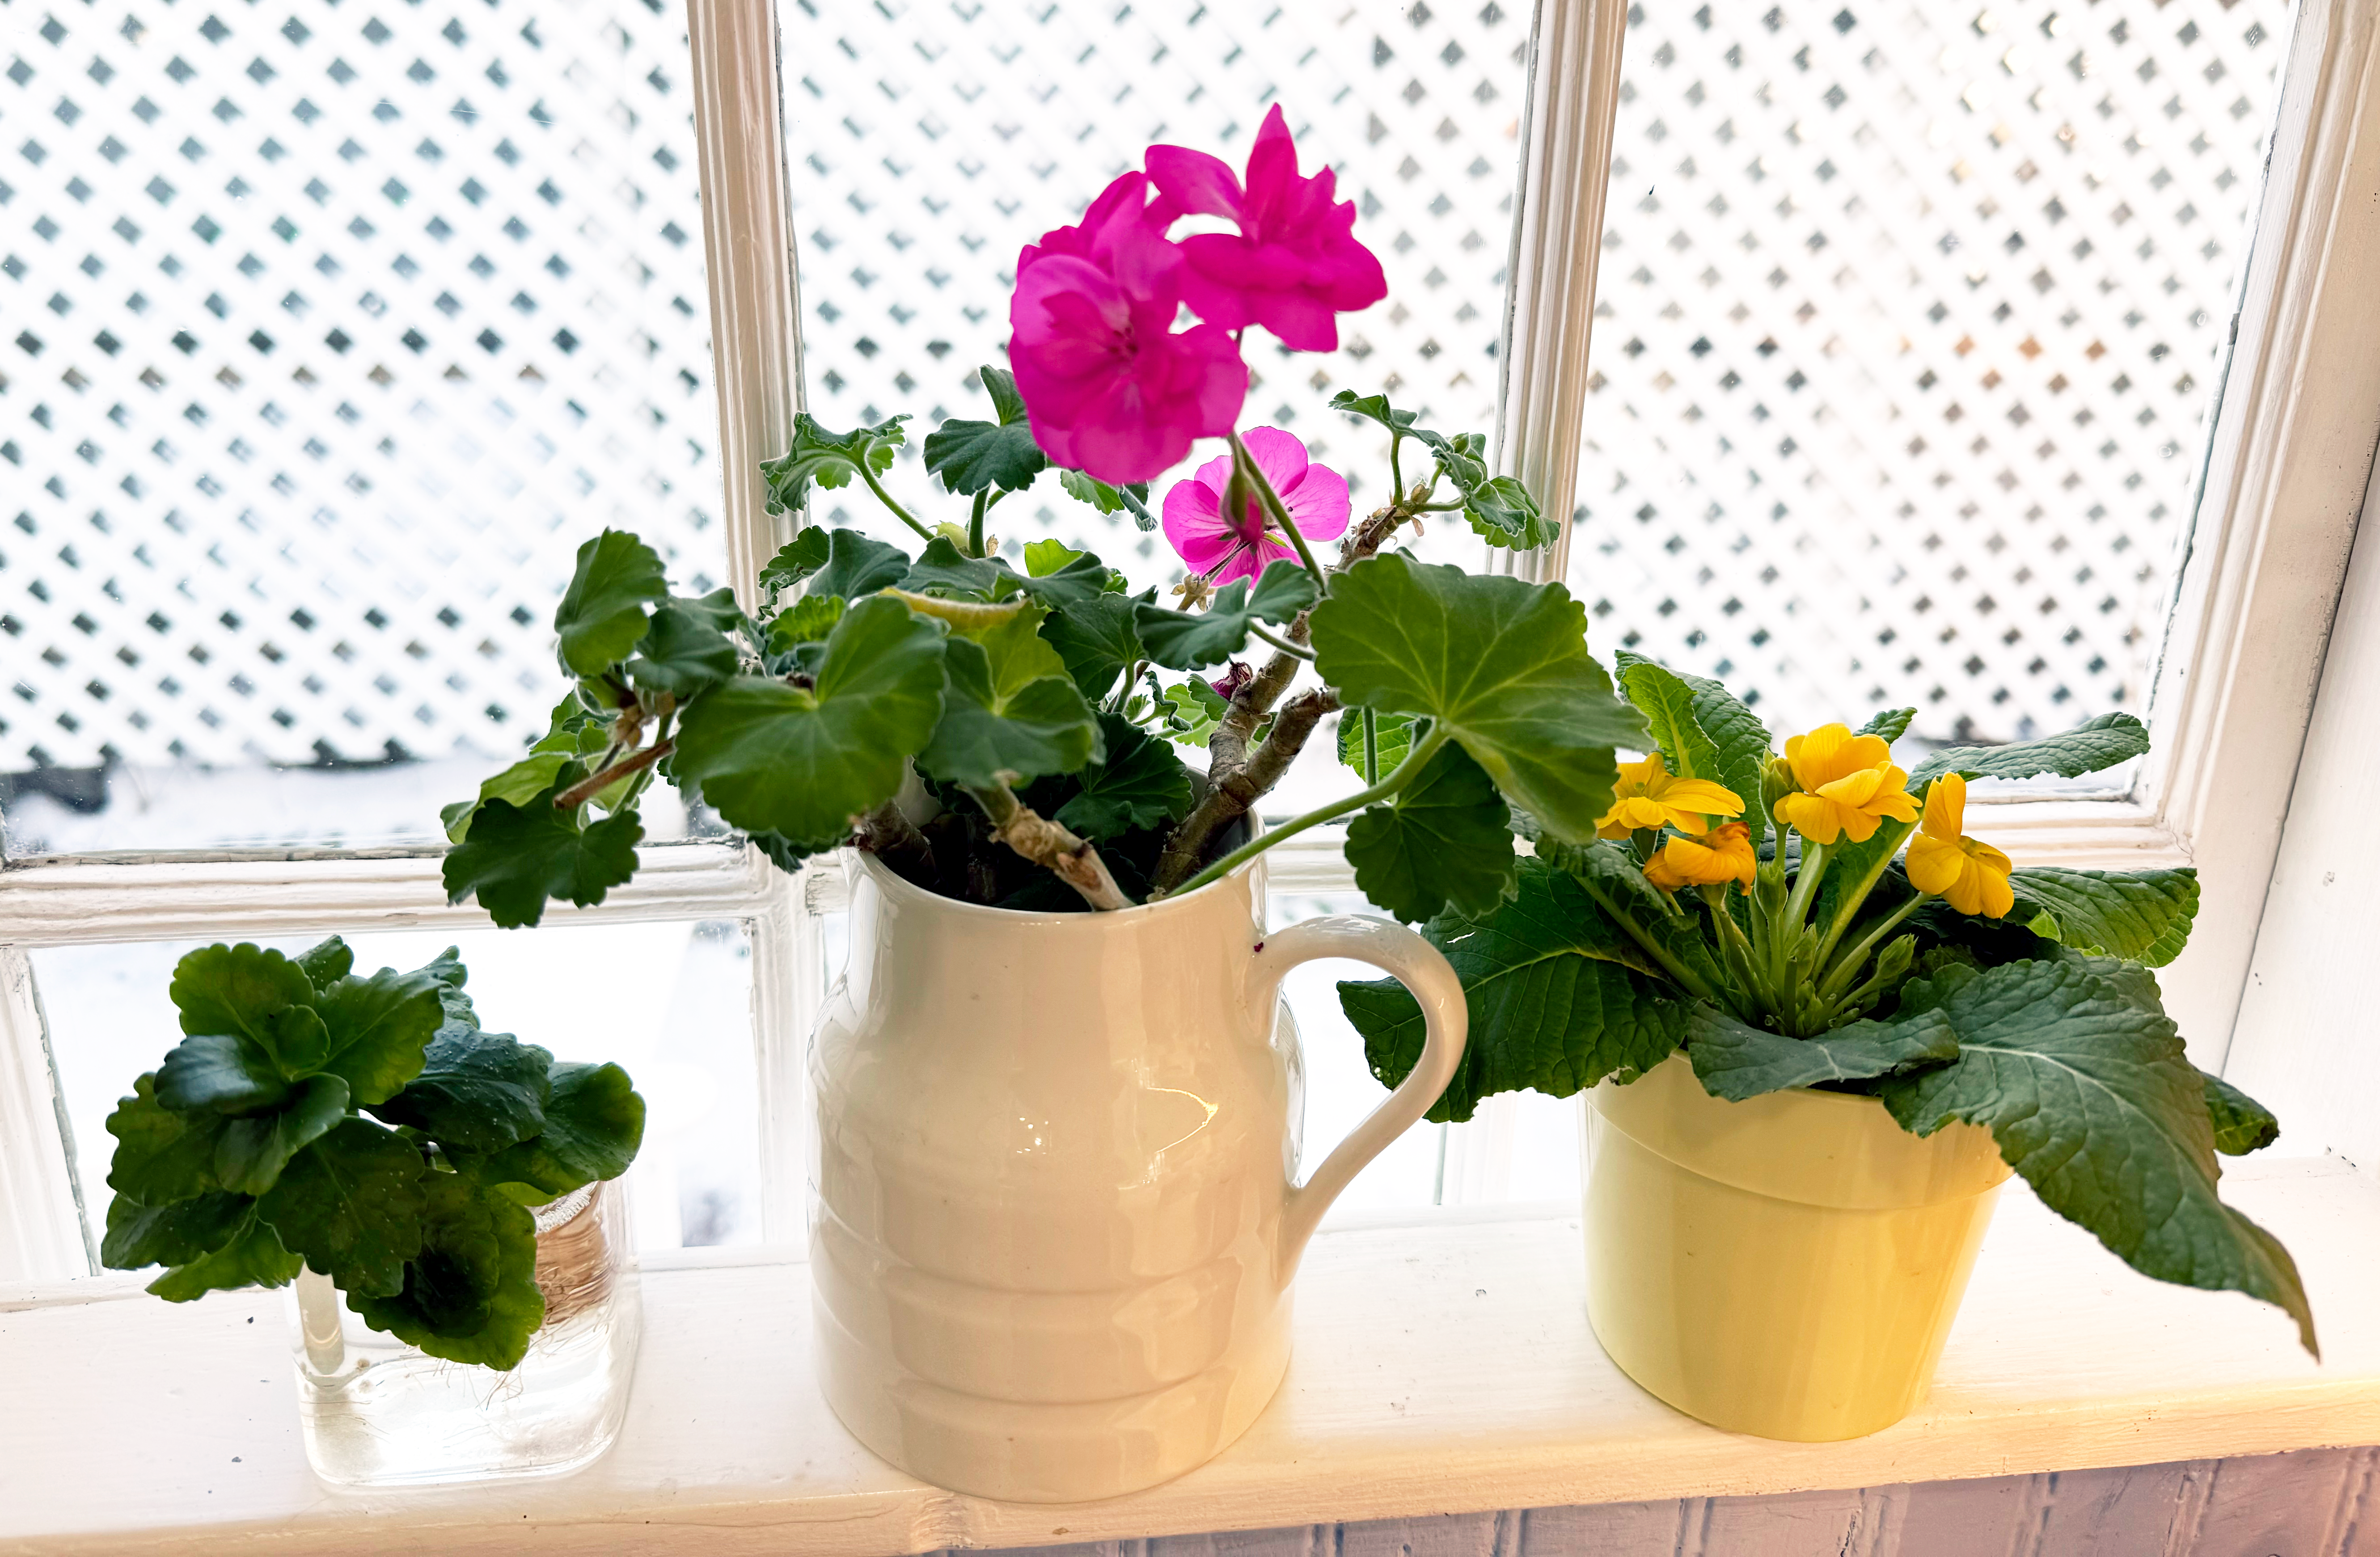 Assorted flowers on the windowsill with snow on the ground below